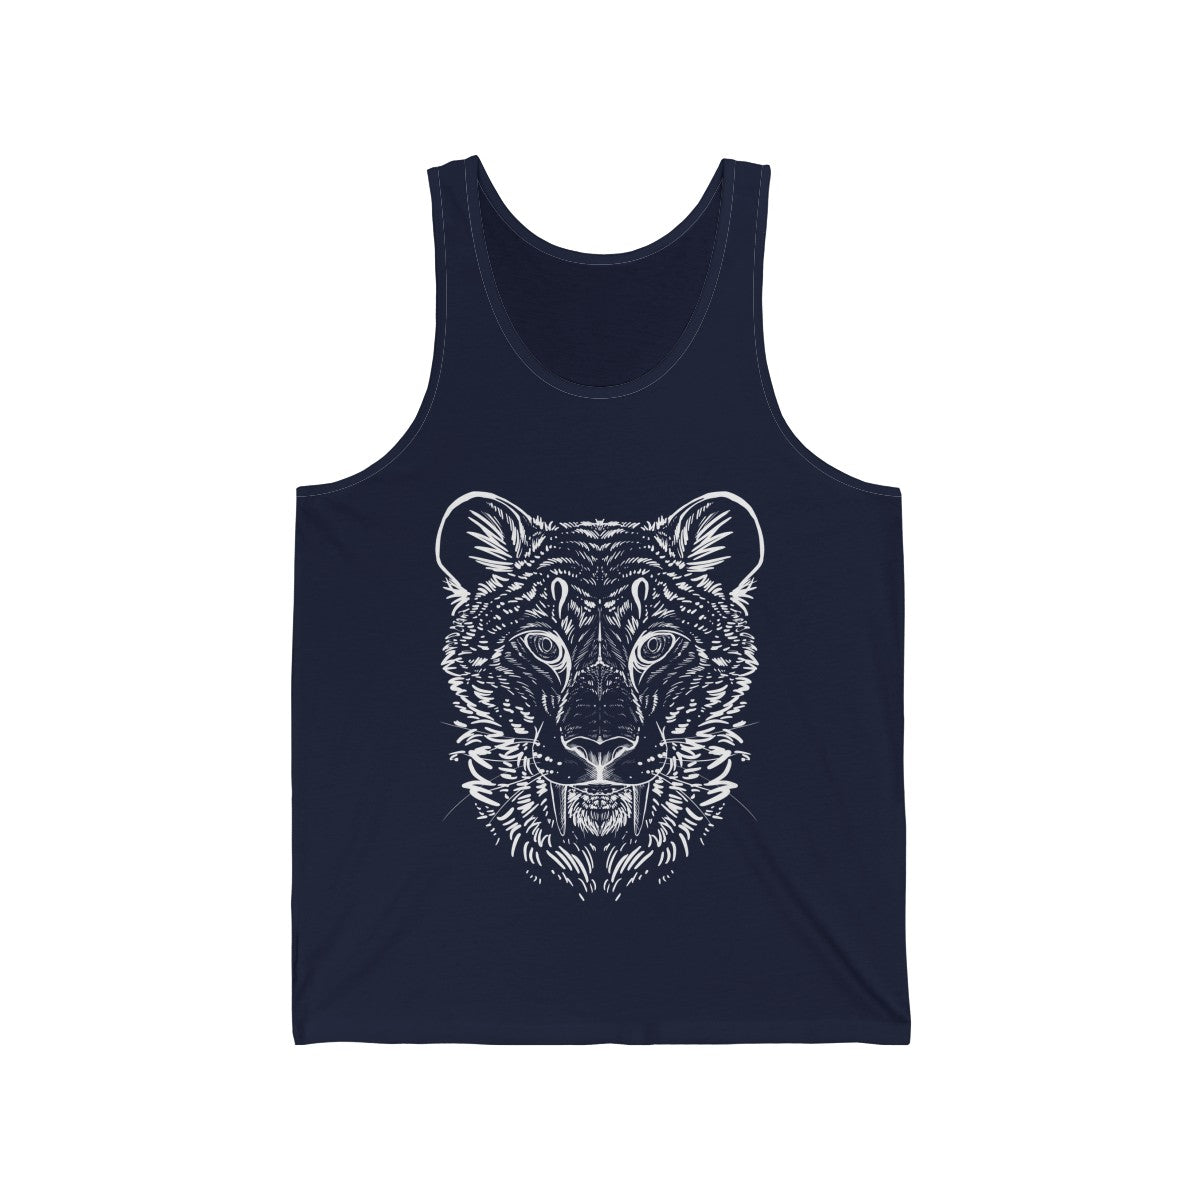 Wolf Colored - Tank Top Tank Top Dire Creatures Navy Blue XS 